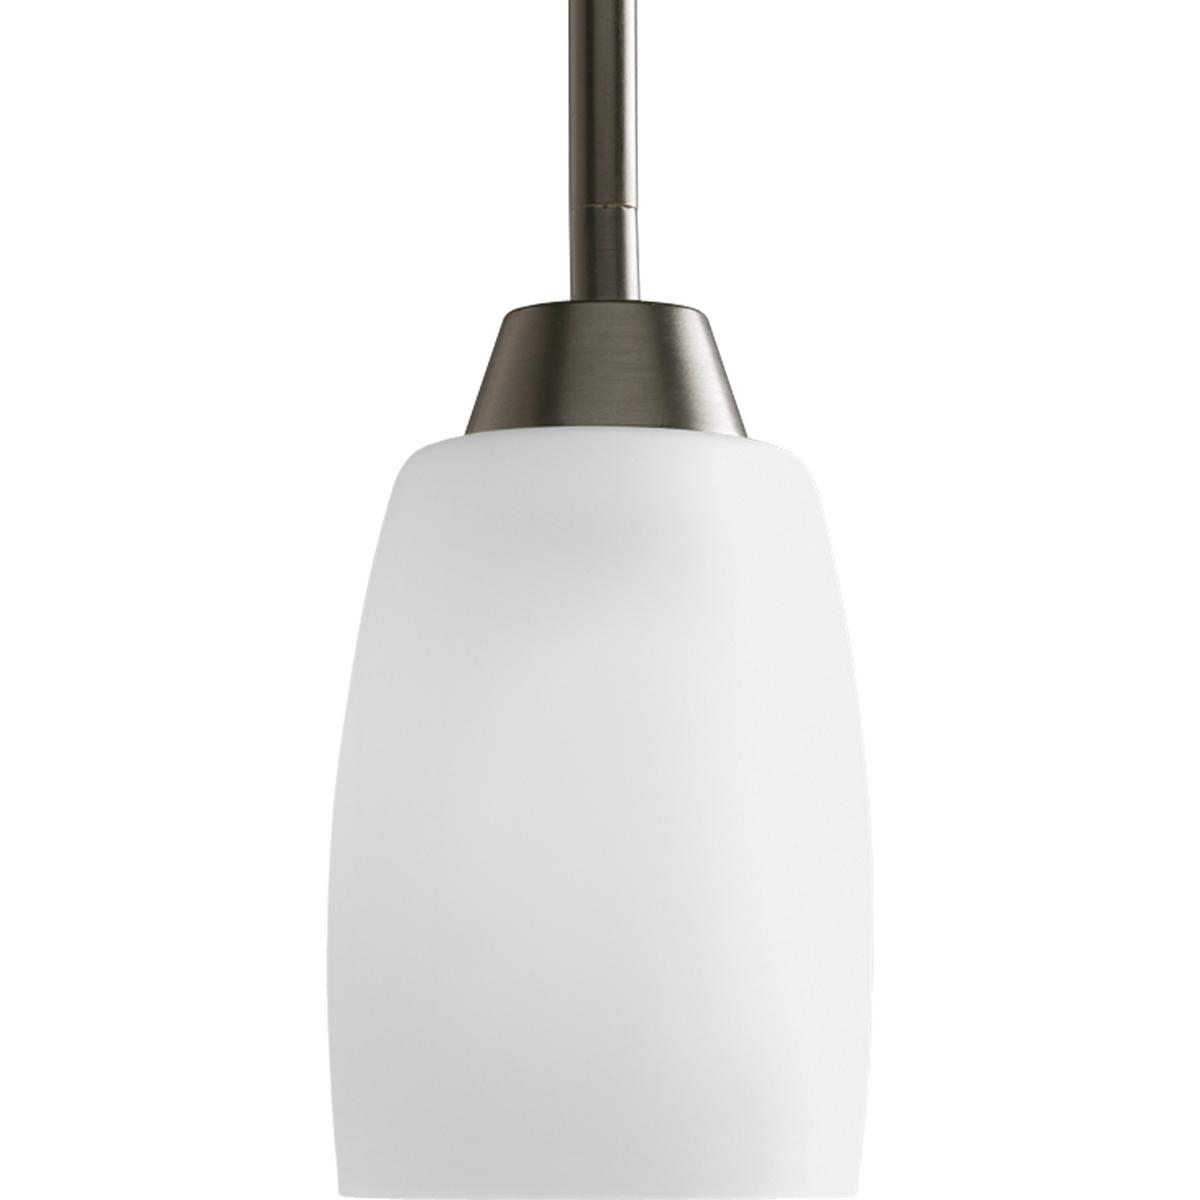 Hubbell P5108-20 The Wisten Collection features sweeping arcs framing elegant, tapered glass shades. Cool and modern with a casual flair, Wisten provides a signature look to any room.  One-light mini-pendant with etched glass in an Antique Bronze finish.  ; Sweeping arms 